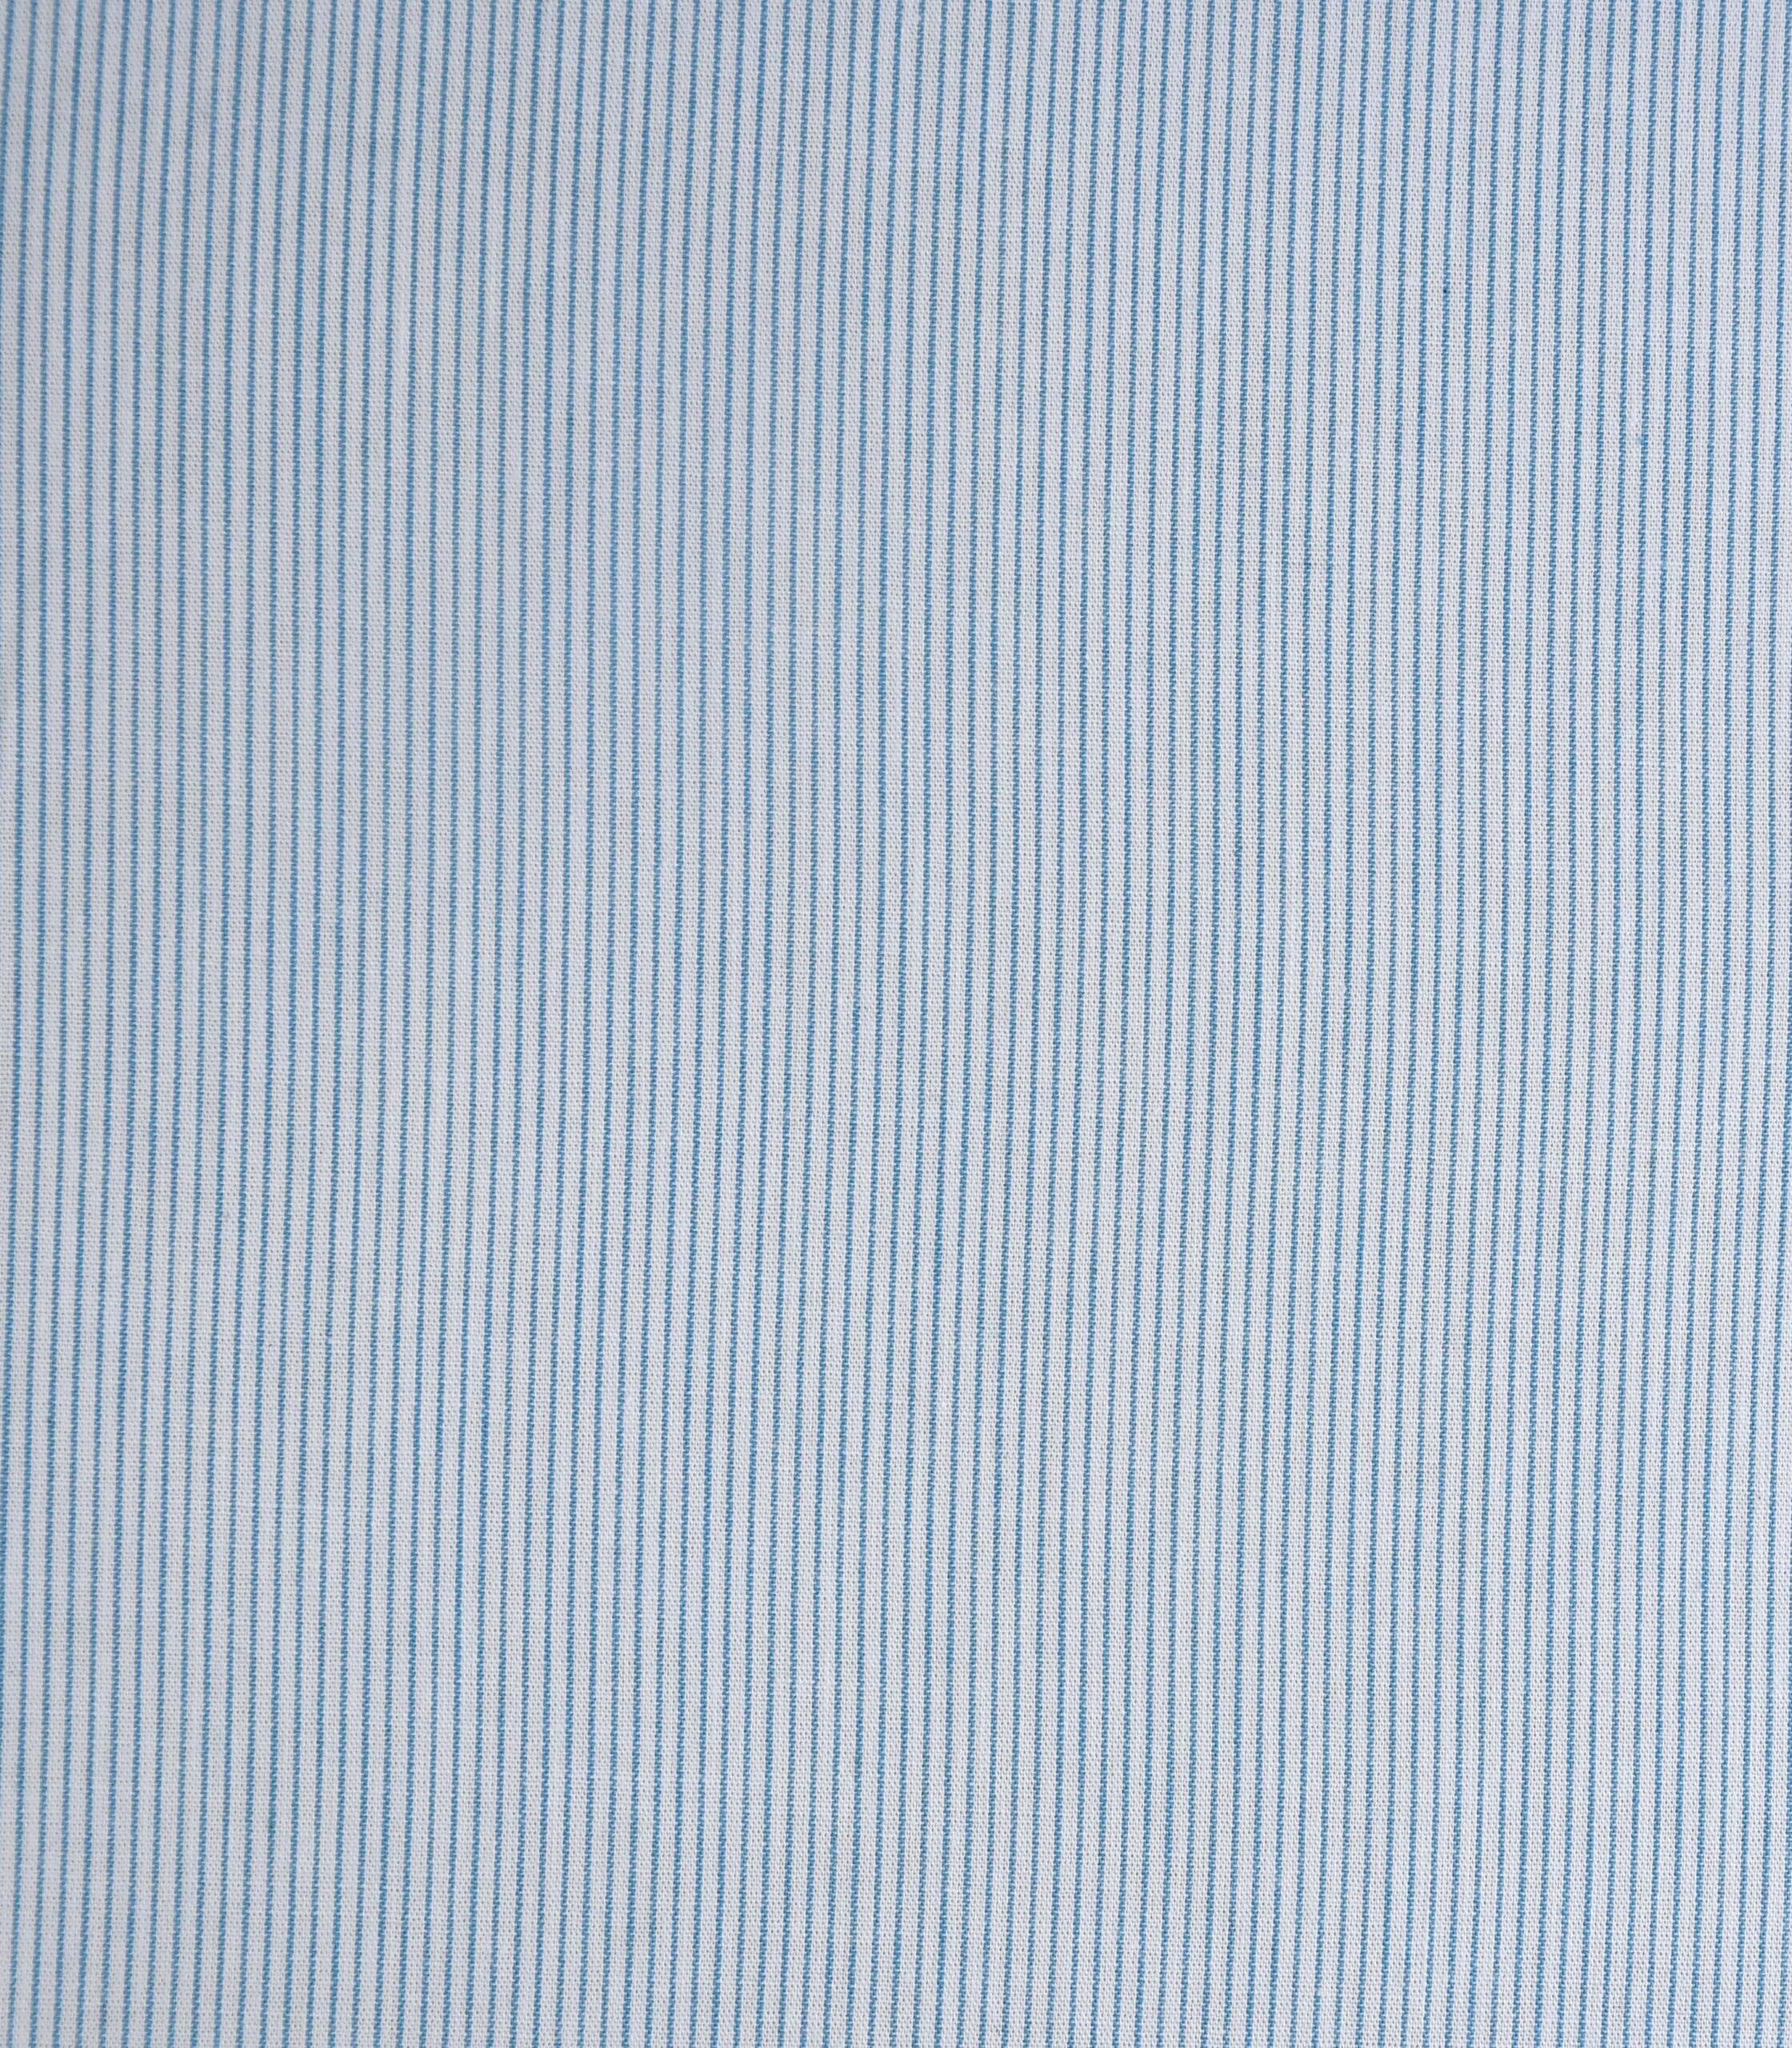 Striped Cotton OCS 100 Dobby Weave Fabric Manufacturer,Striped